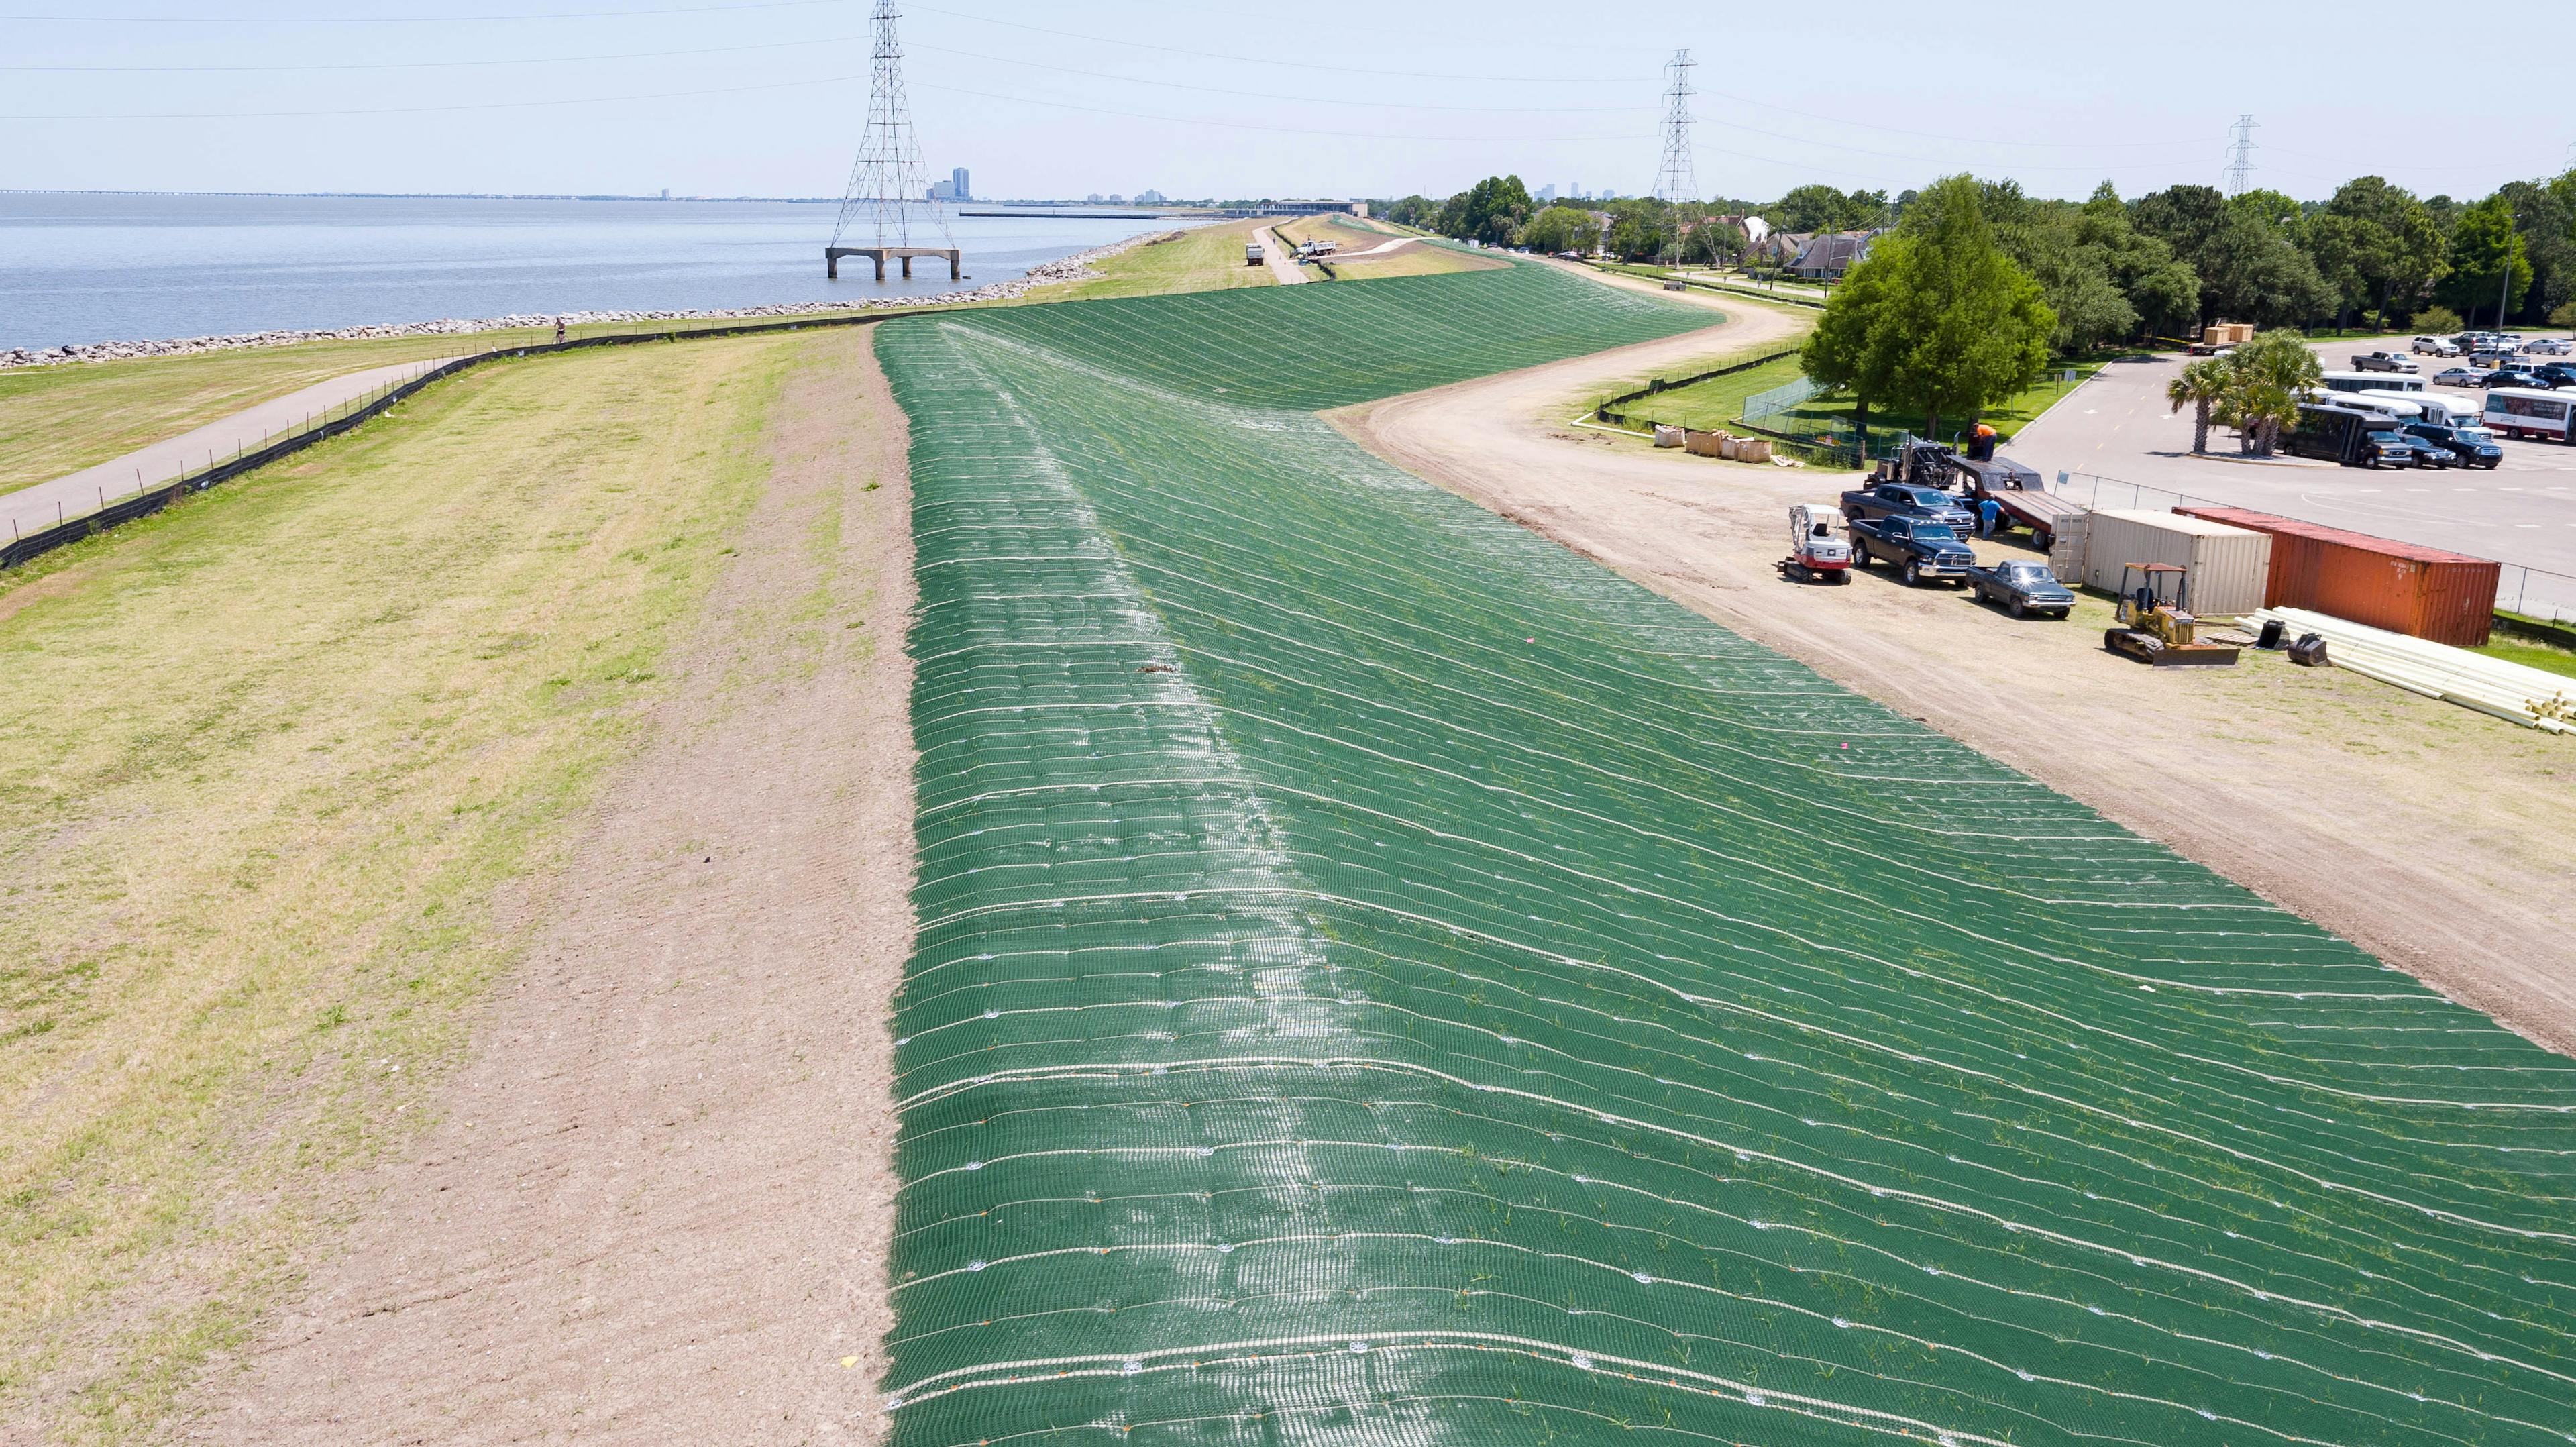 Providing levee resilience and durability